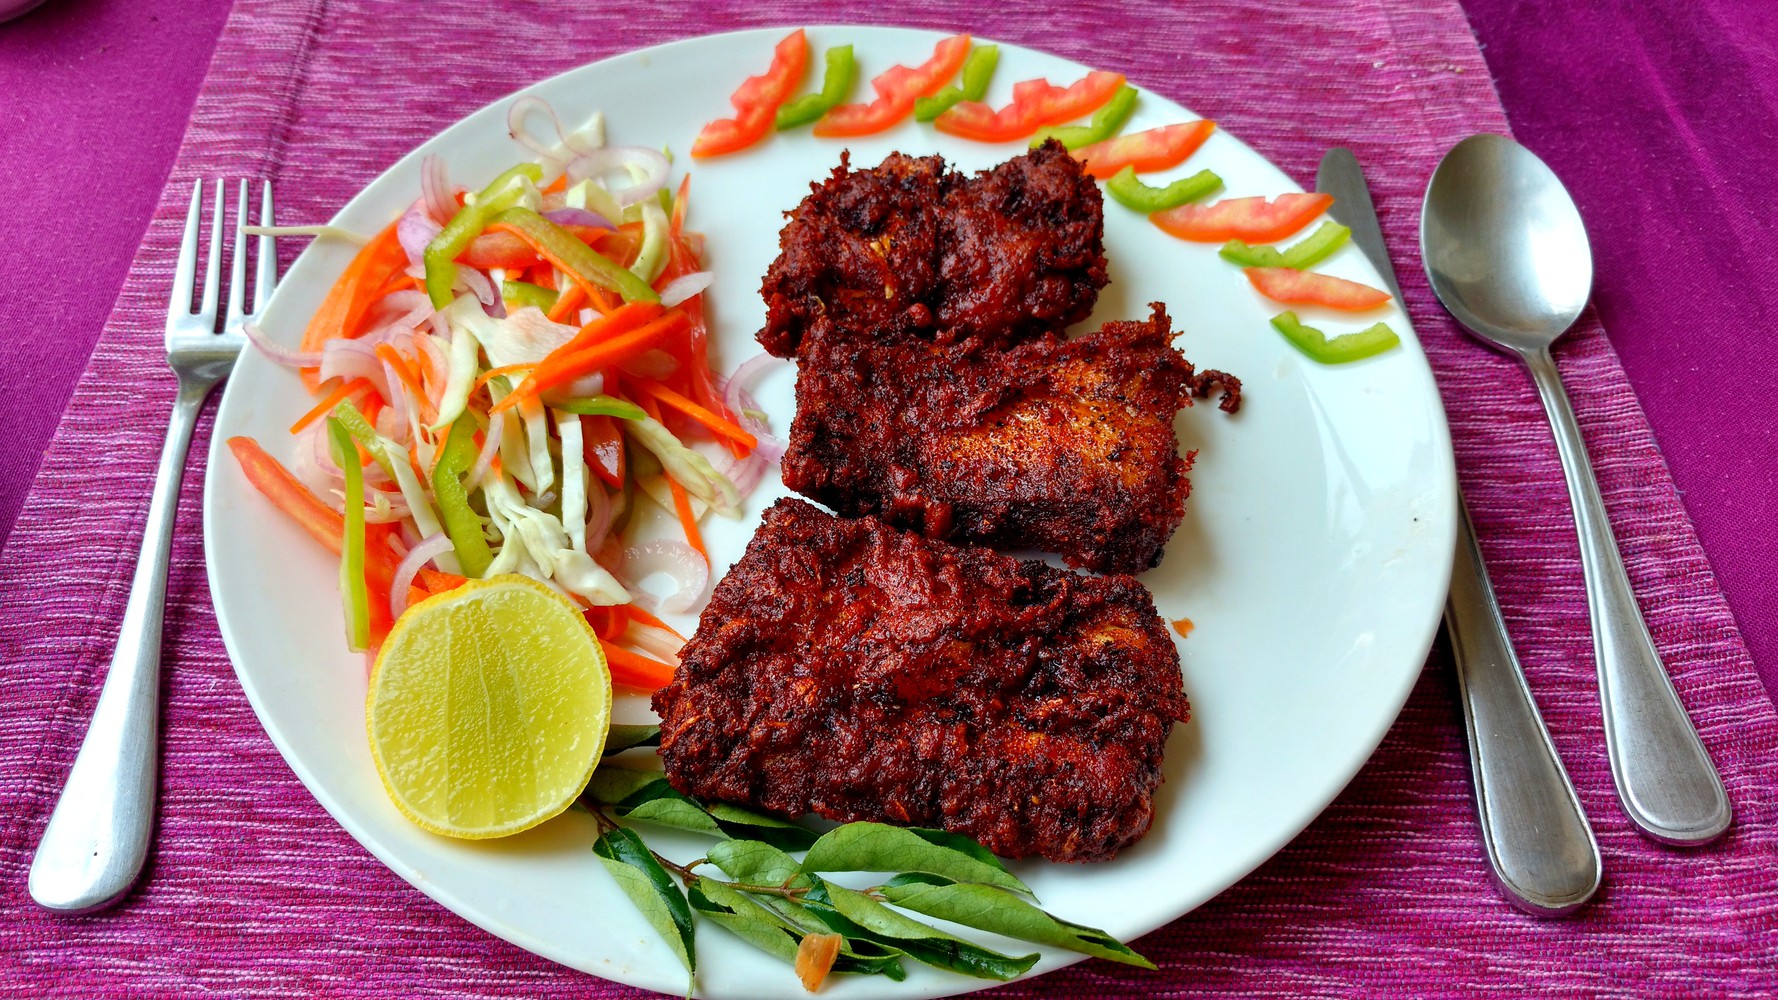 Three pieces of masala fried fish served with salad and a lemon slice